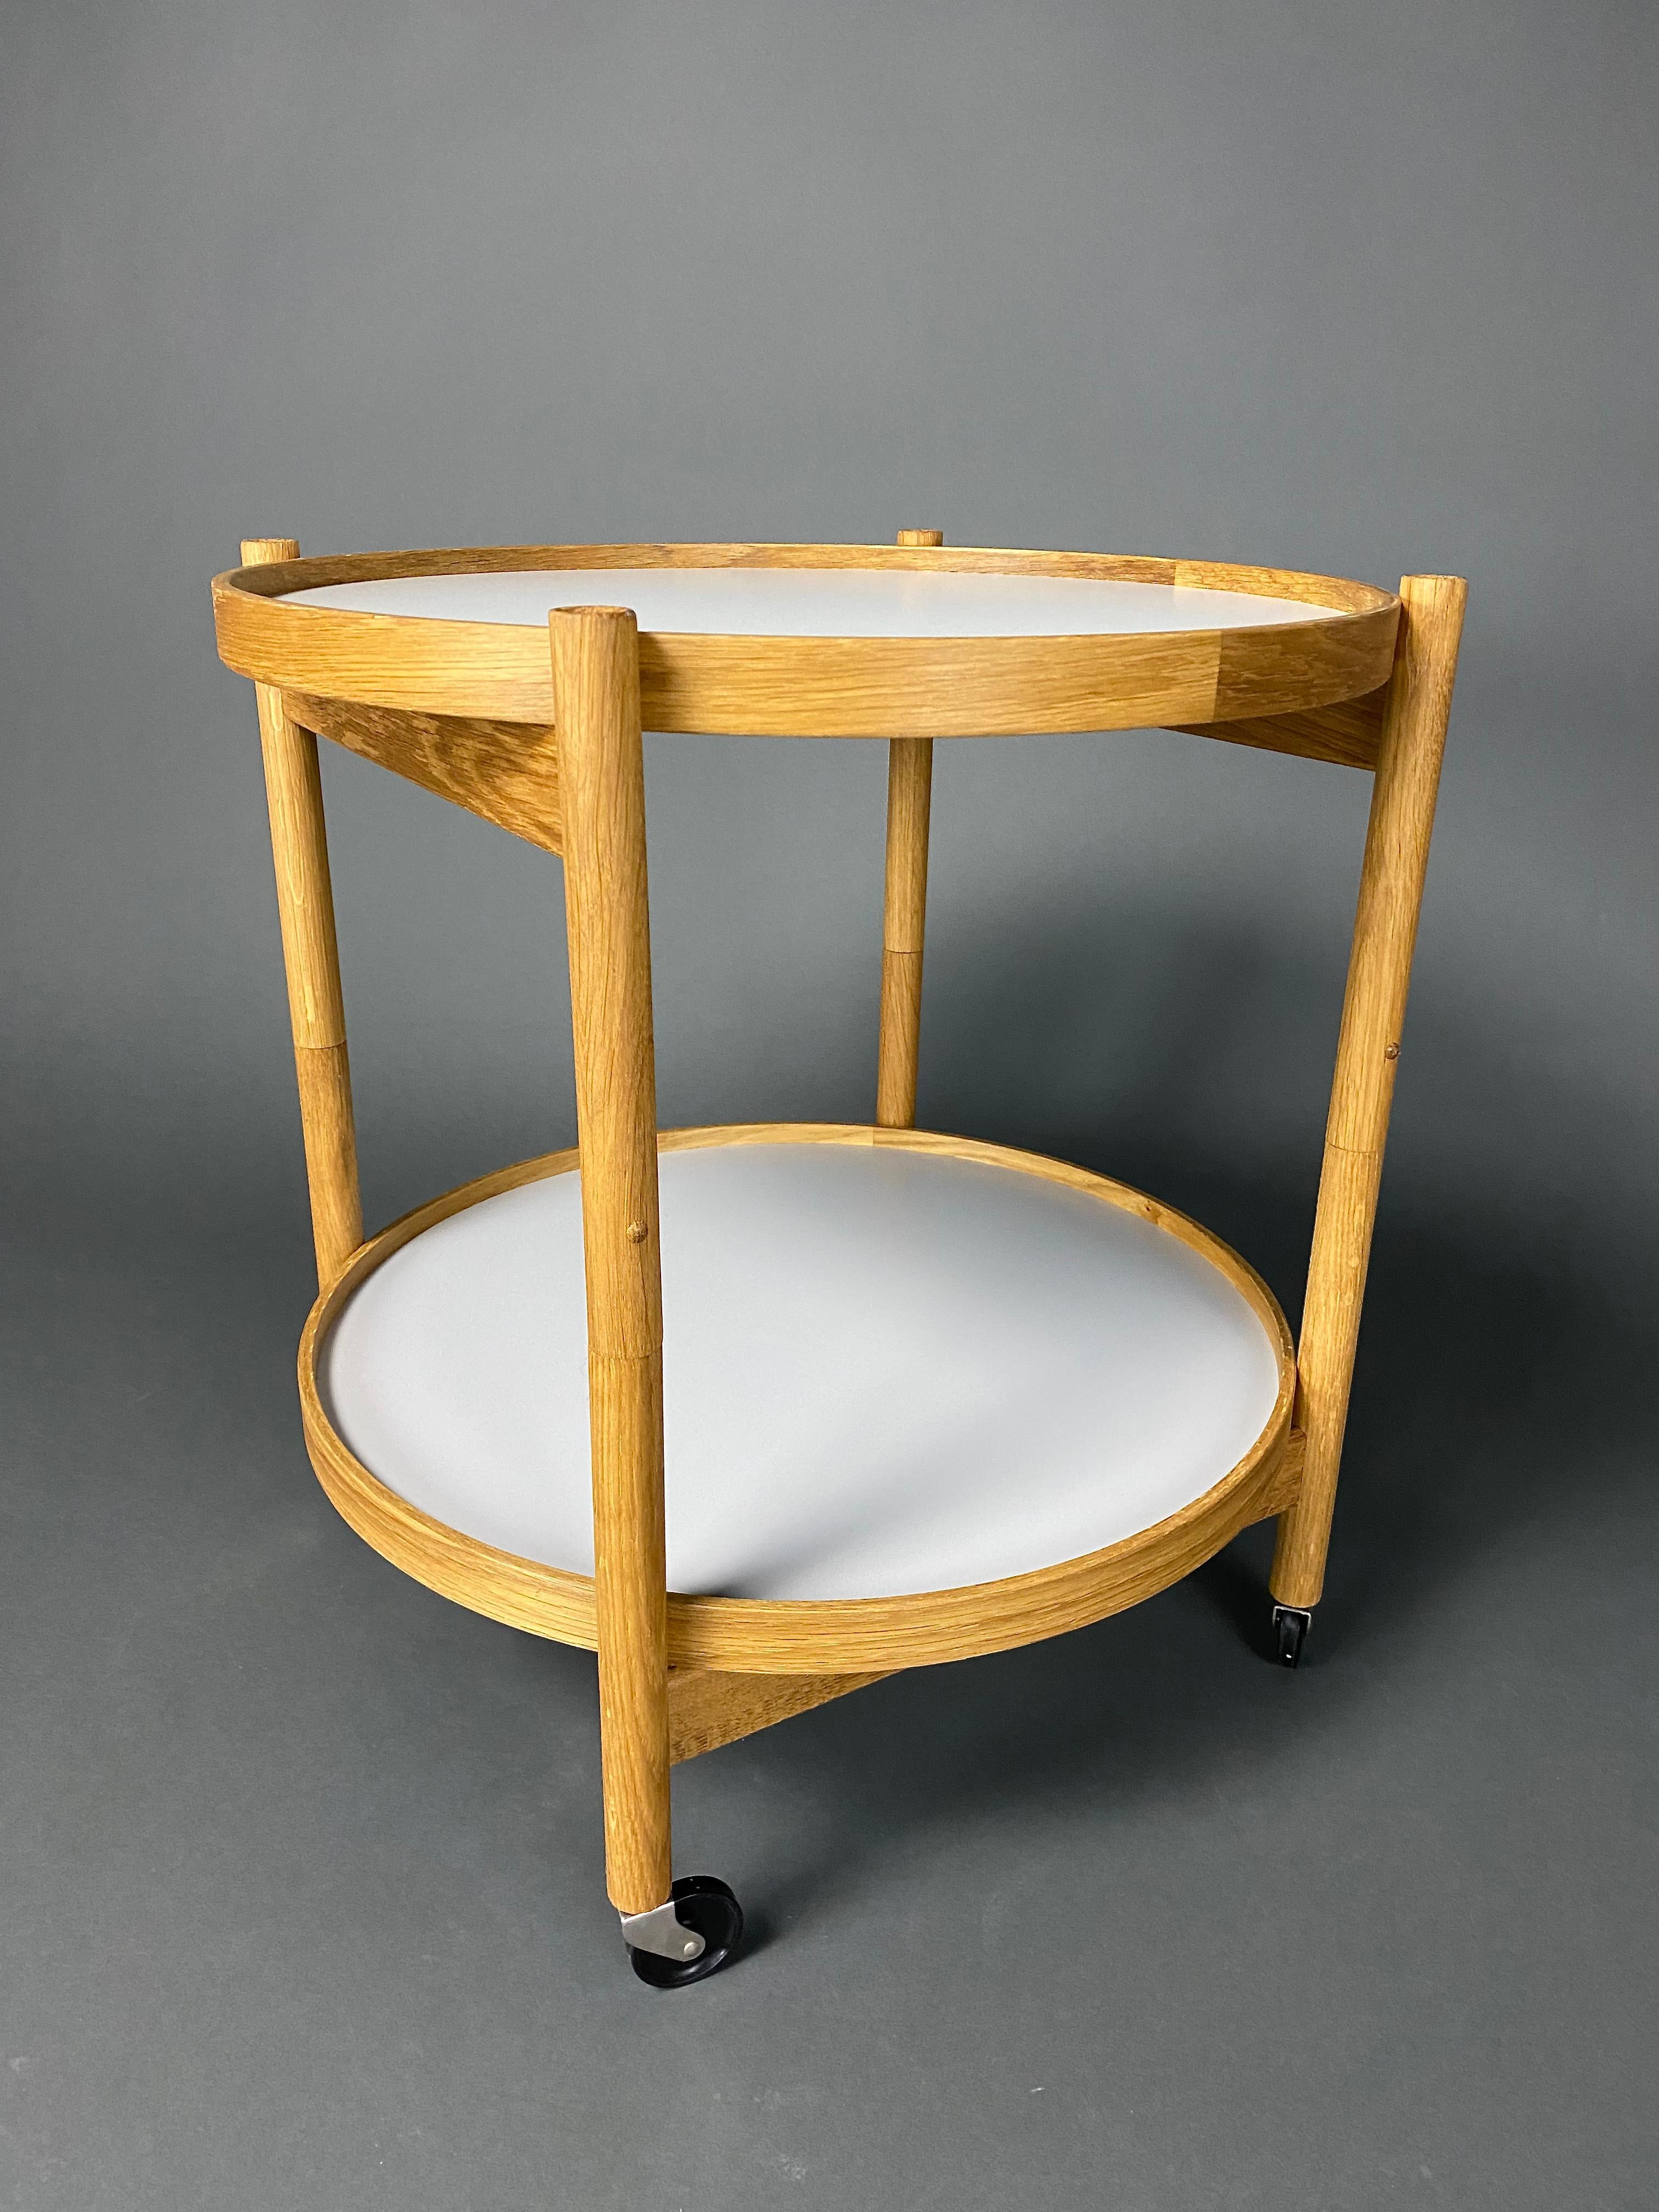 Danish Mid-Century Modern Foldable Serving Trolley For Sale 3